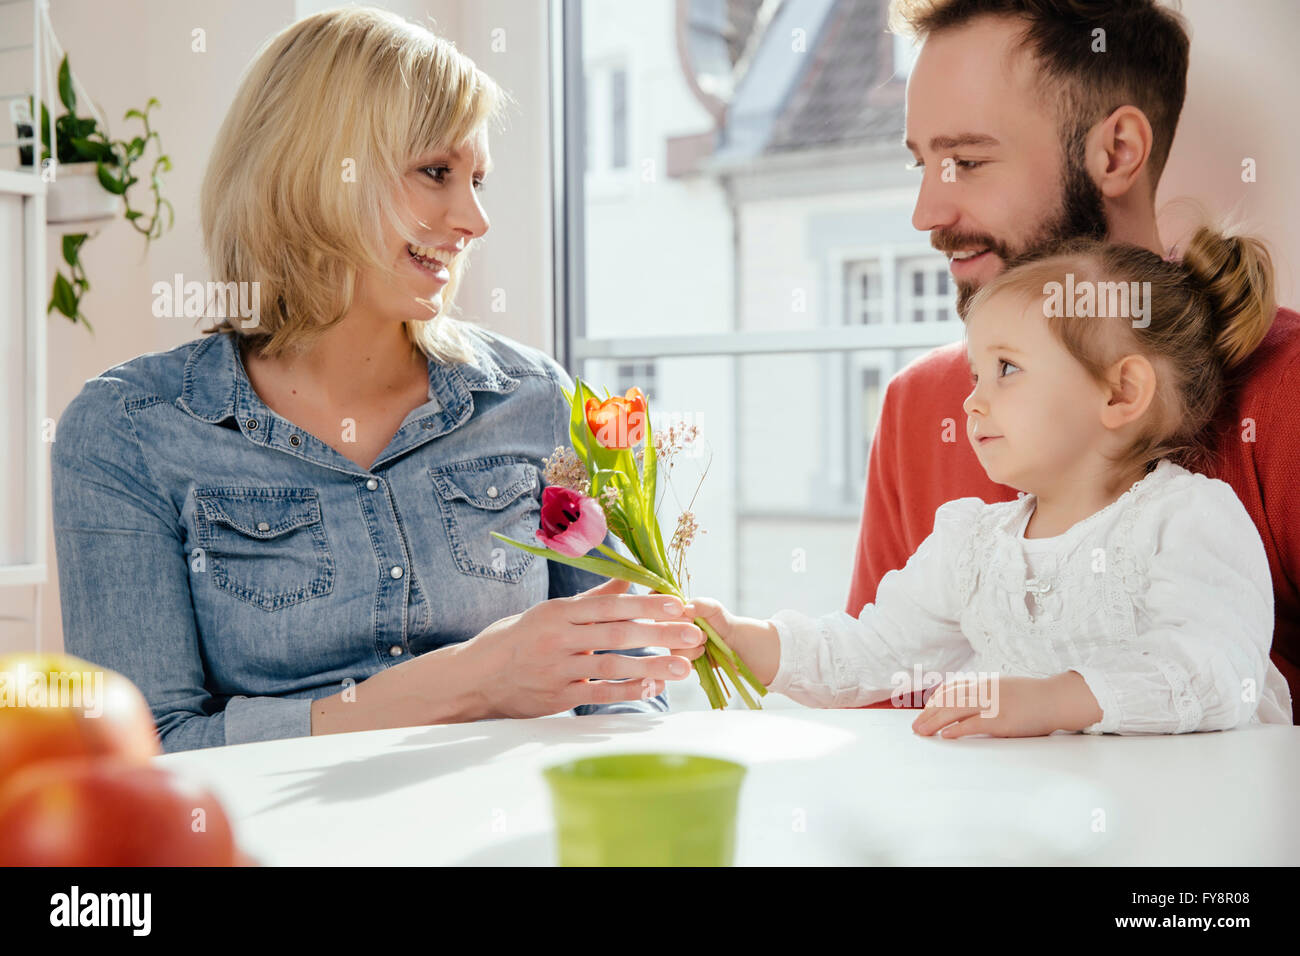 Little girl giving her mother flowers while father is watching Stock Photo